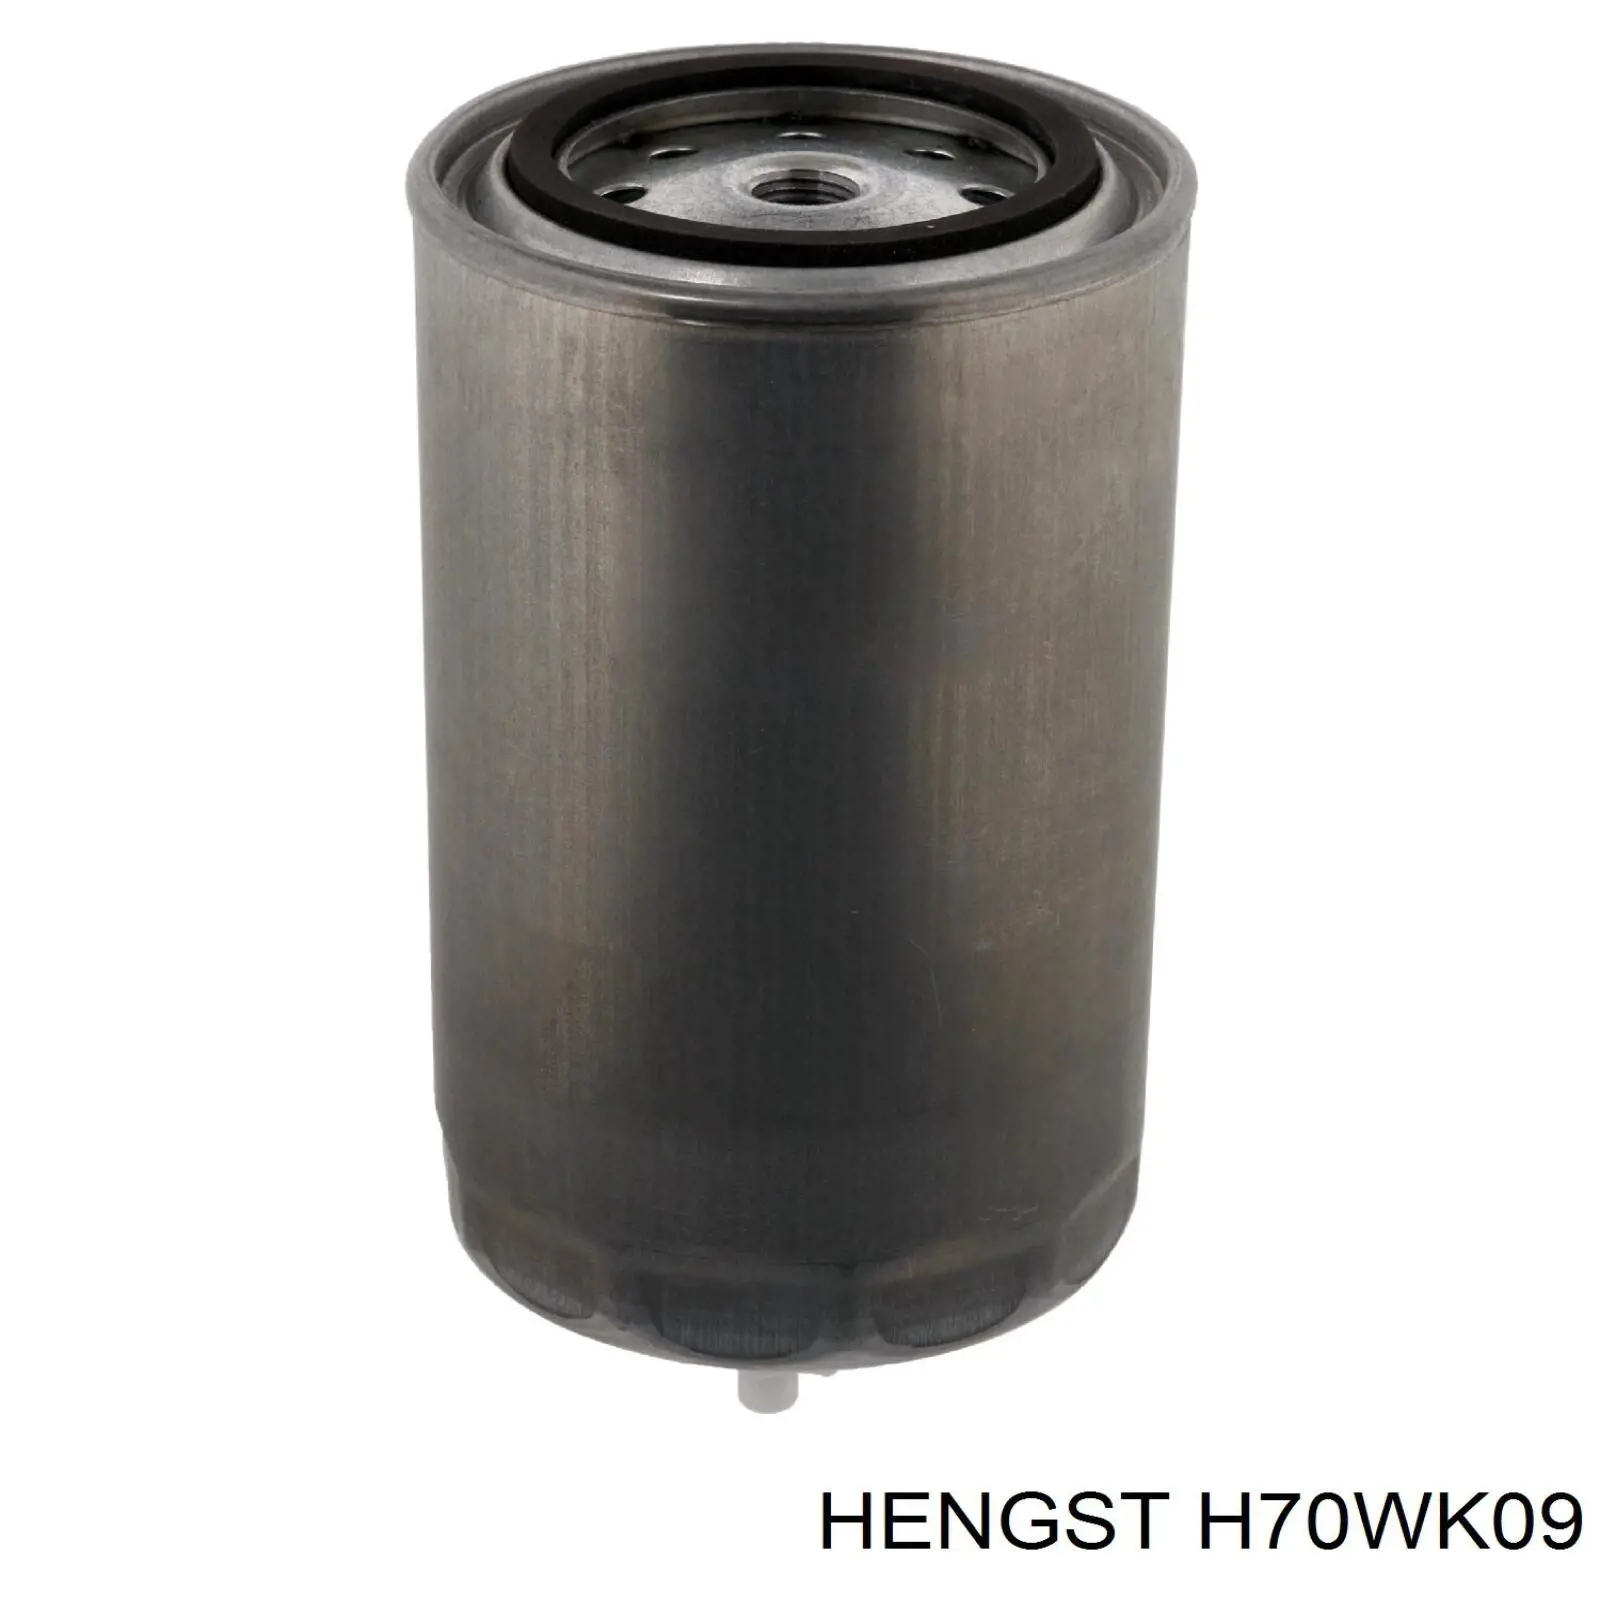 H70WK09 Hengst filtro combustible